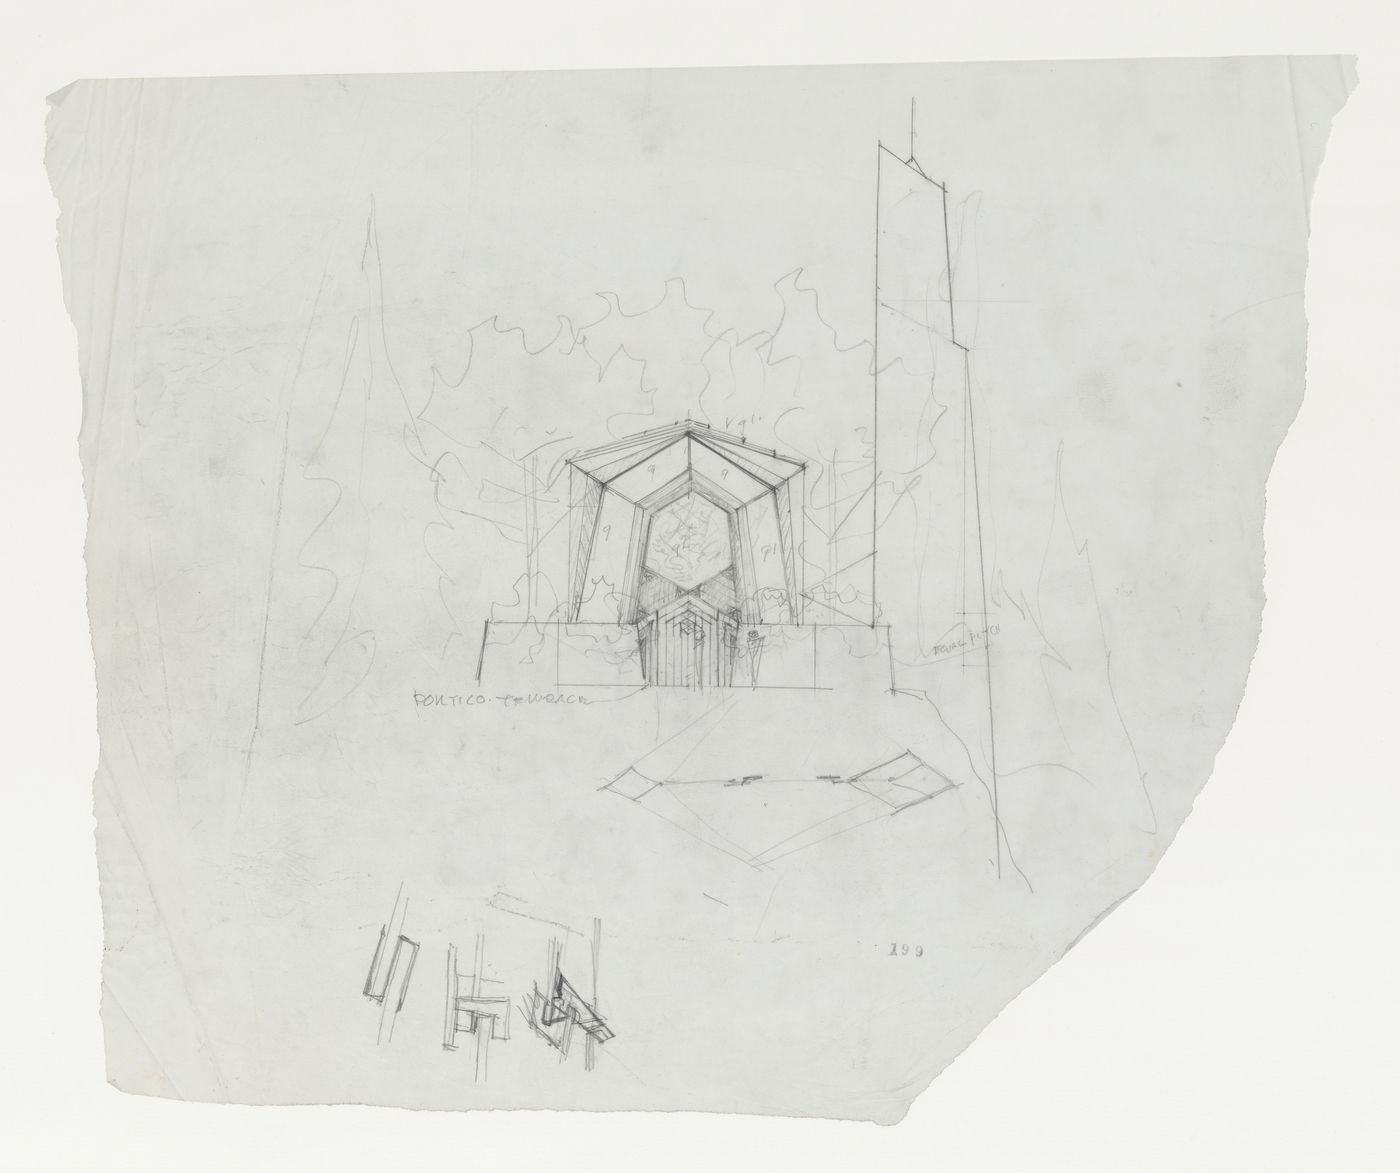 Wayfarers' Chapel, Palos Verdes, California: Entrance elevation for the chapel with details for glass framing and sketch plan for trusses